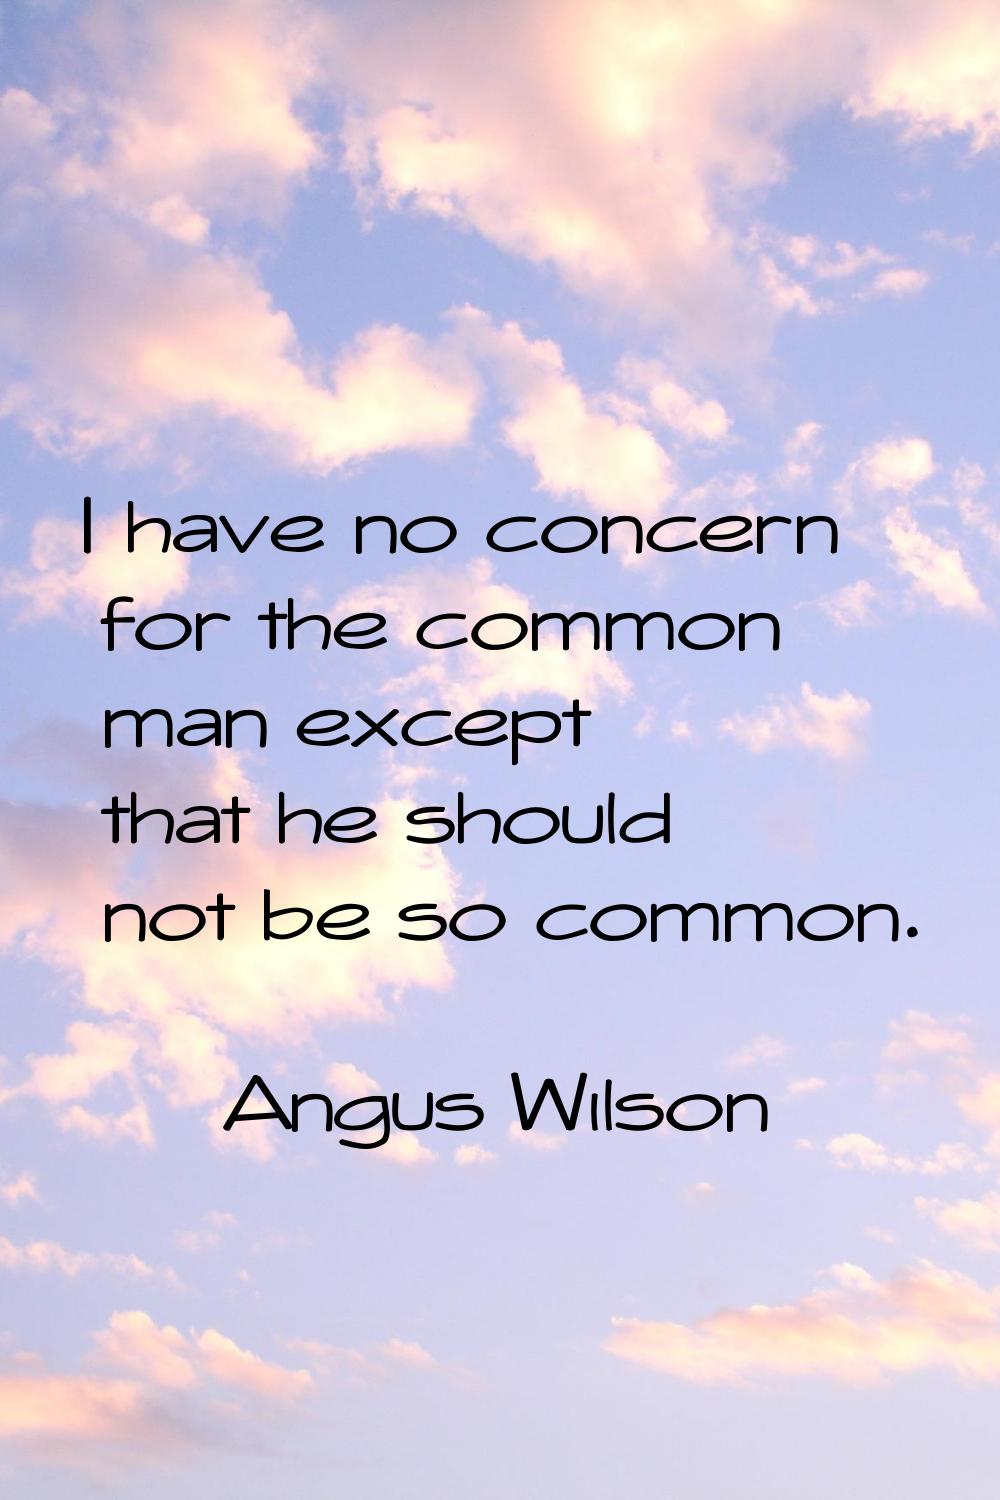 I have no concern for the common man except that he should not be so common.